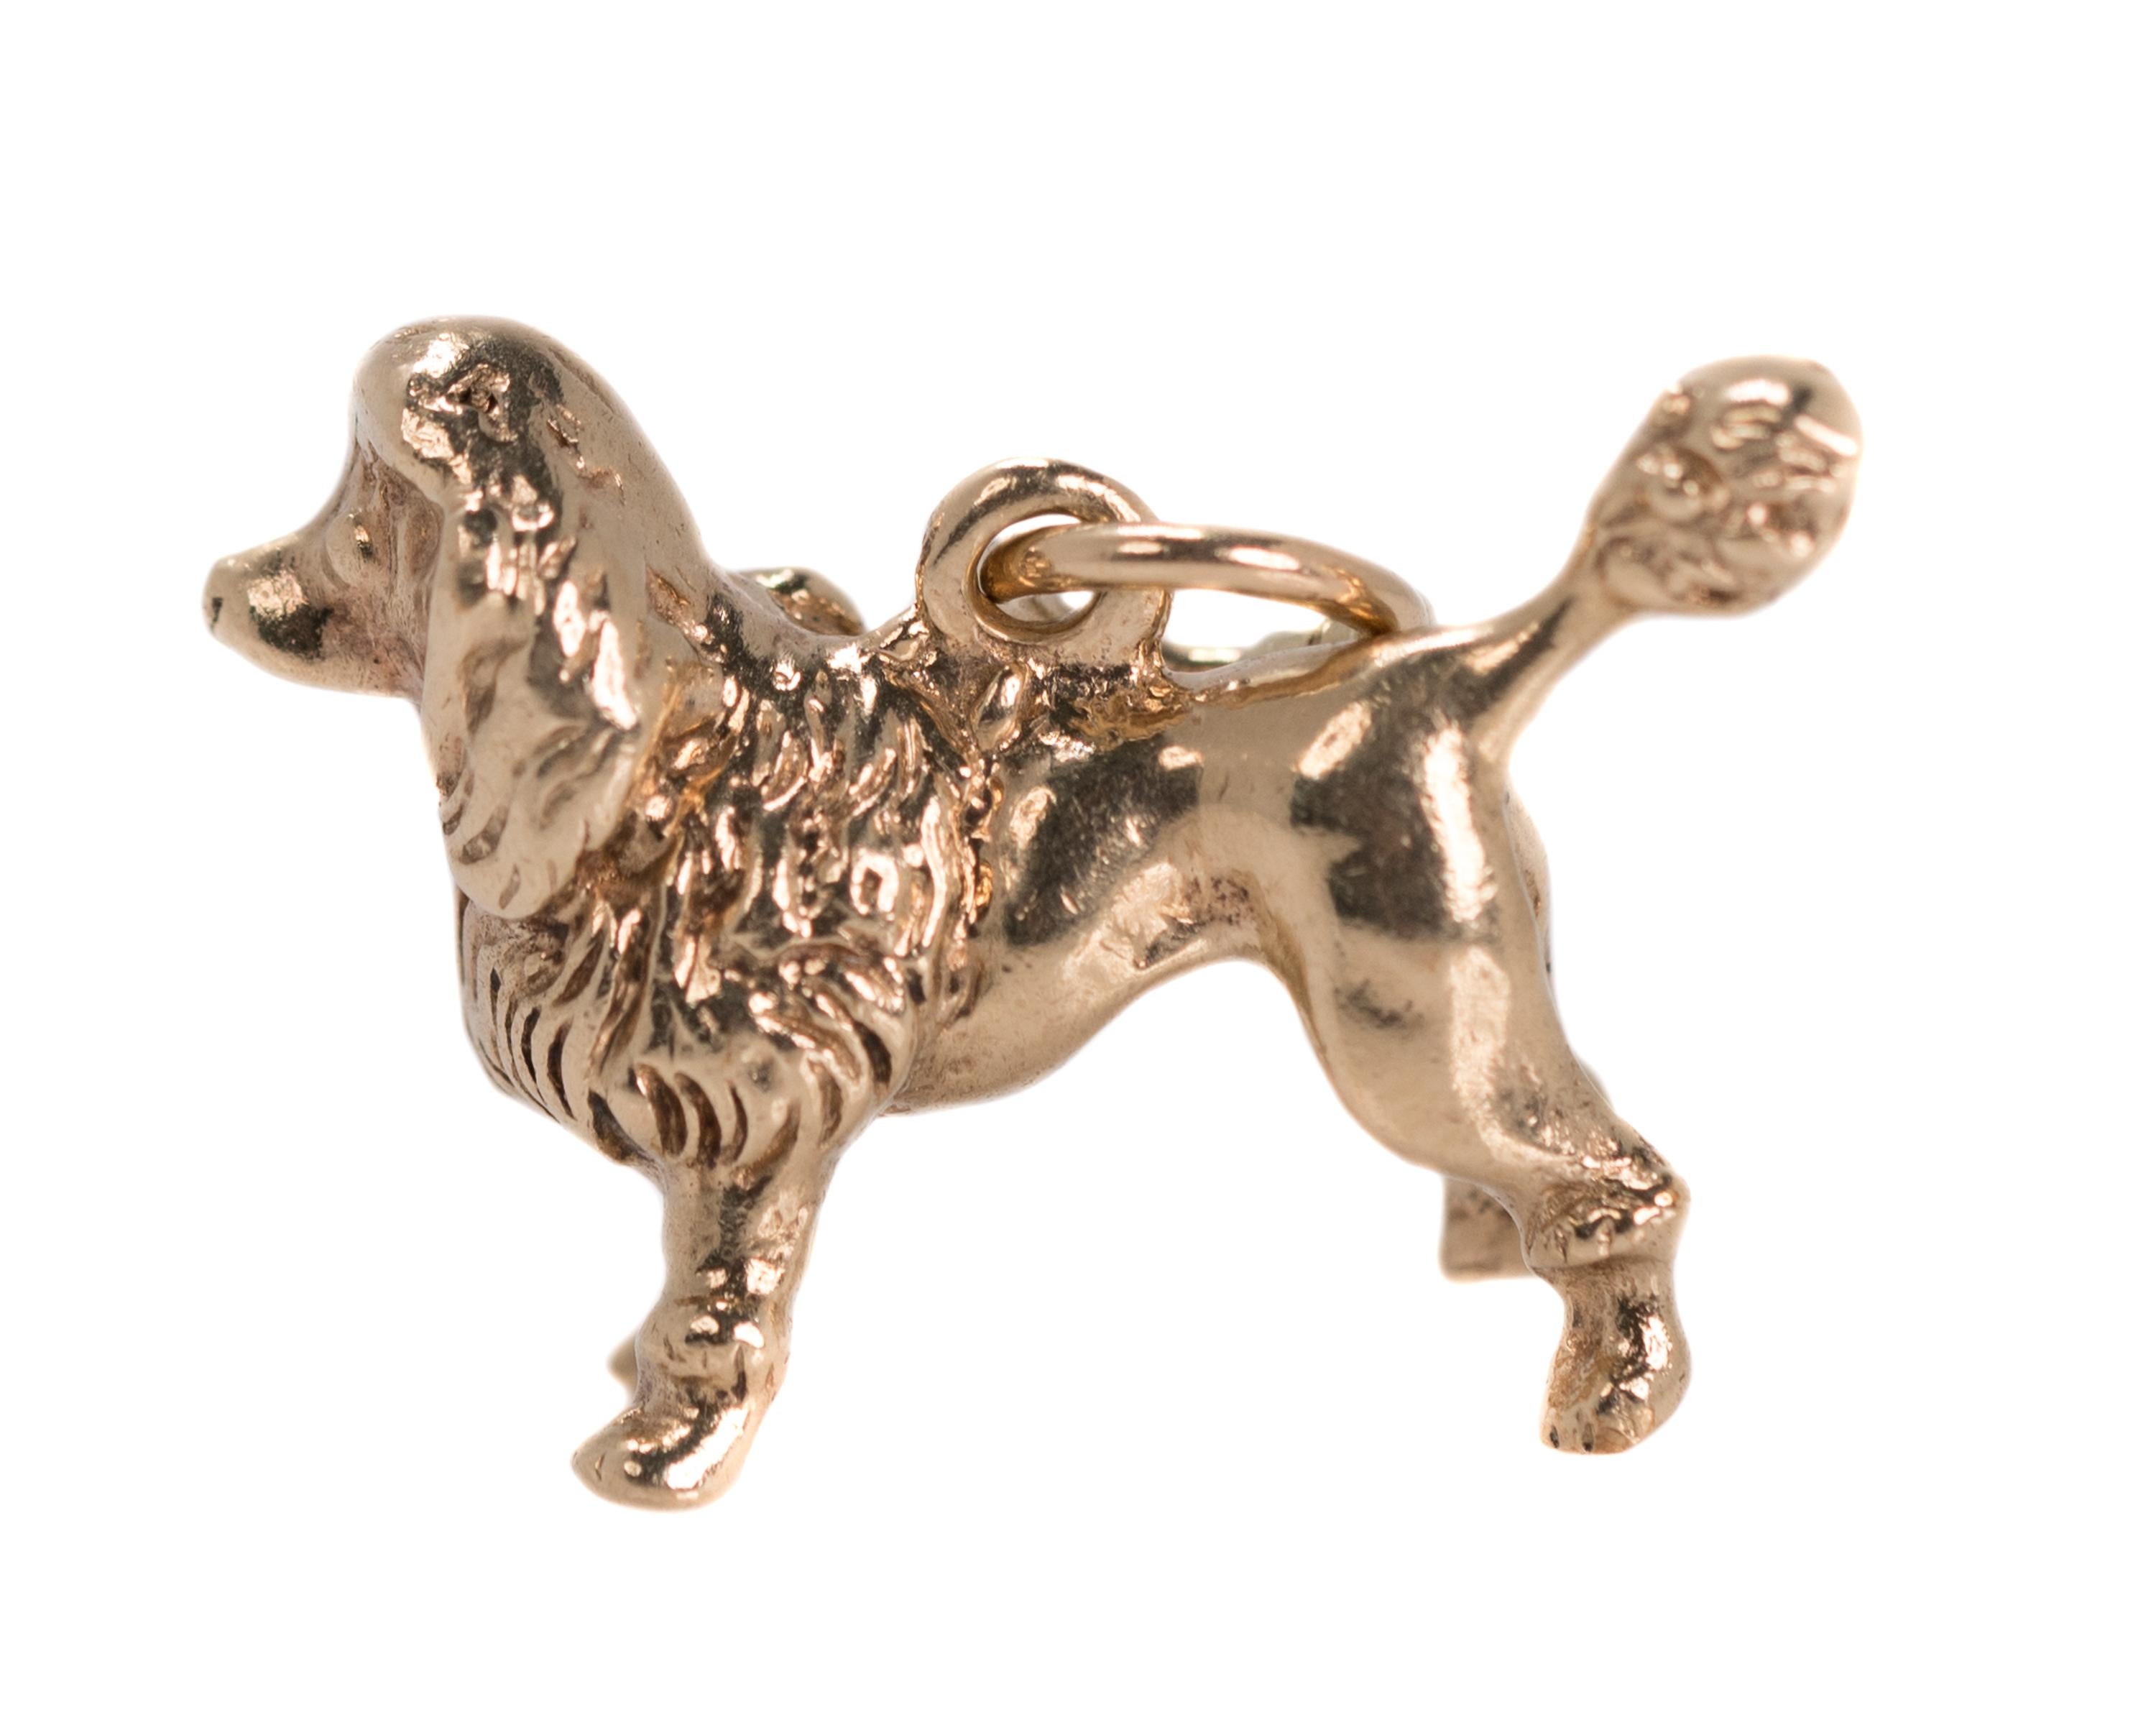 1950s Retro Poodle Dog Charm, Pendant - 14 Karat Yellow Gold

Features
14 Karat Yellow Gold
Solid Charm
Wear as a pendant or attach as a charm
Poodle has a Continental Clip, Show Dog Style!
Detailed face, Topknot, Tail Pom and Leg Pom